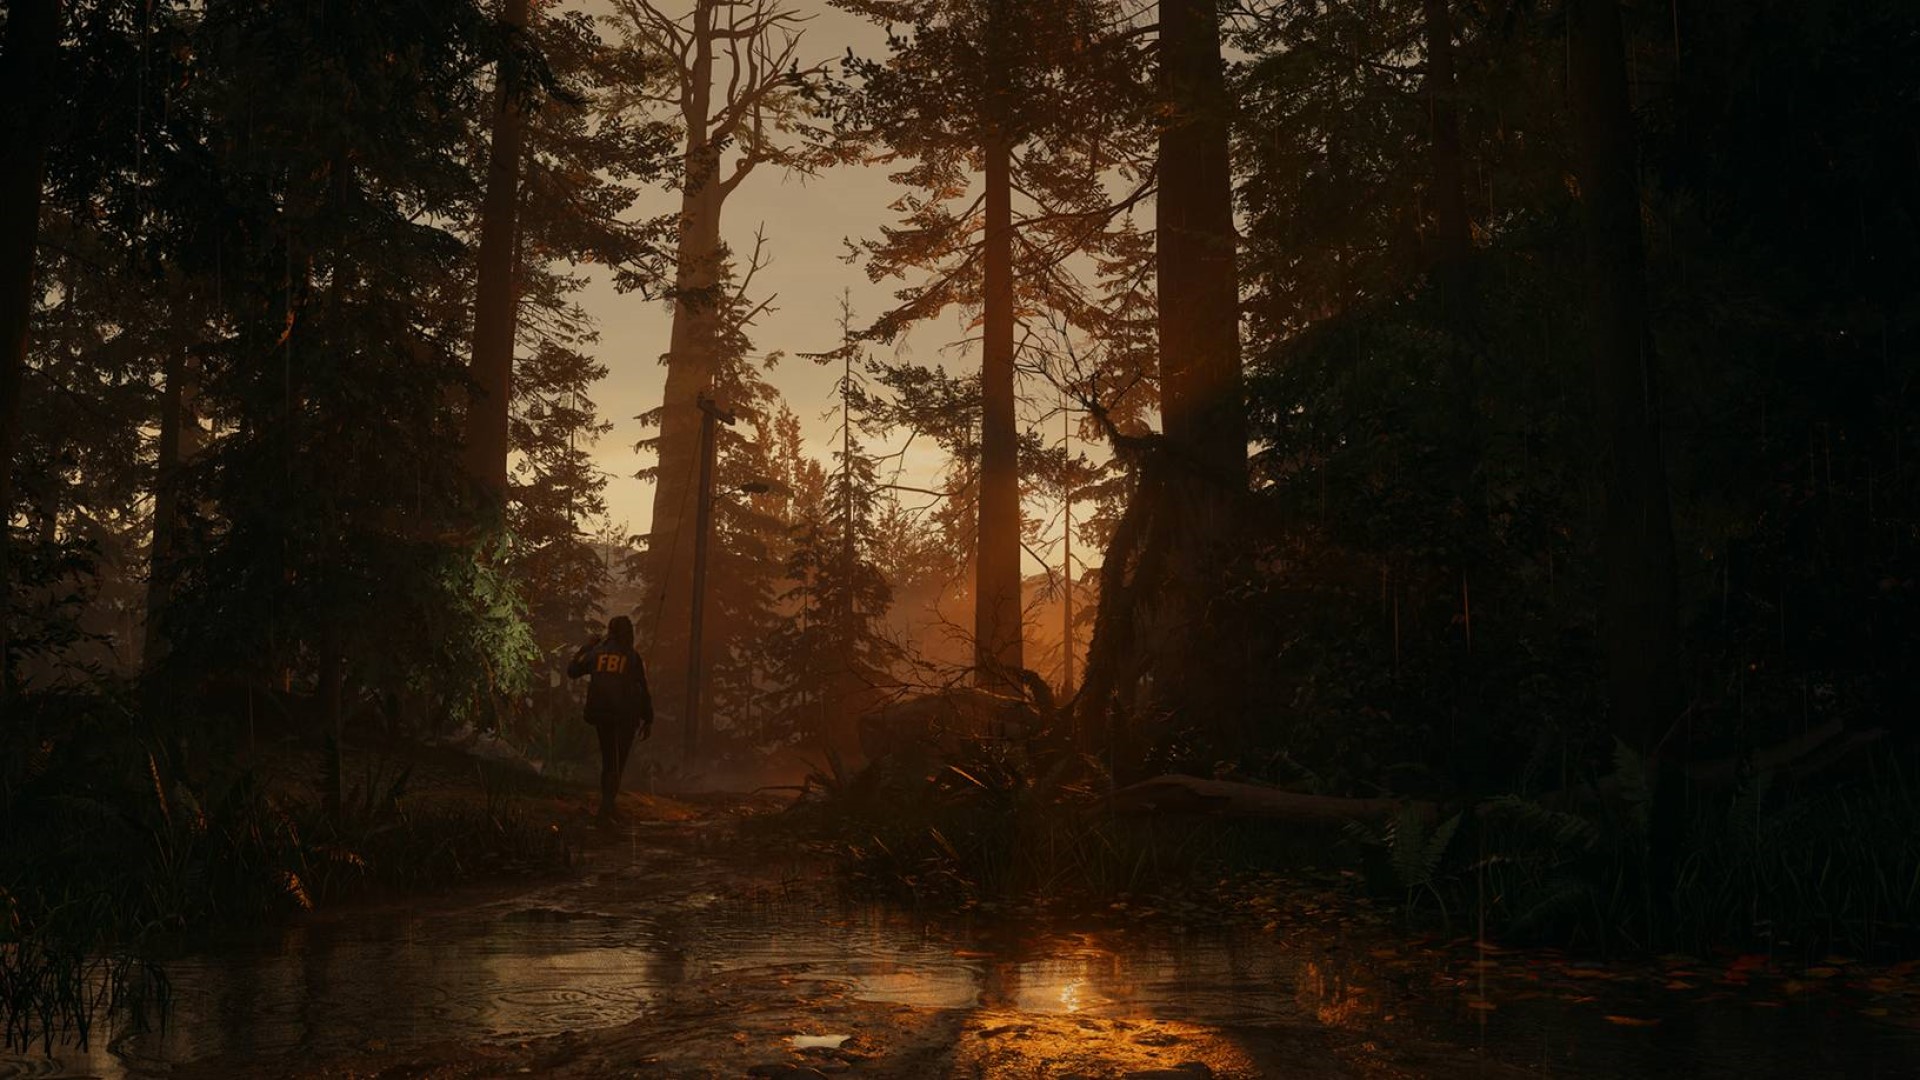 Alan Wake 2 Dev on Going up Against Spider-Man 2 Launch in October – “We Don’t Think About It”